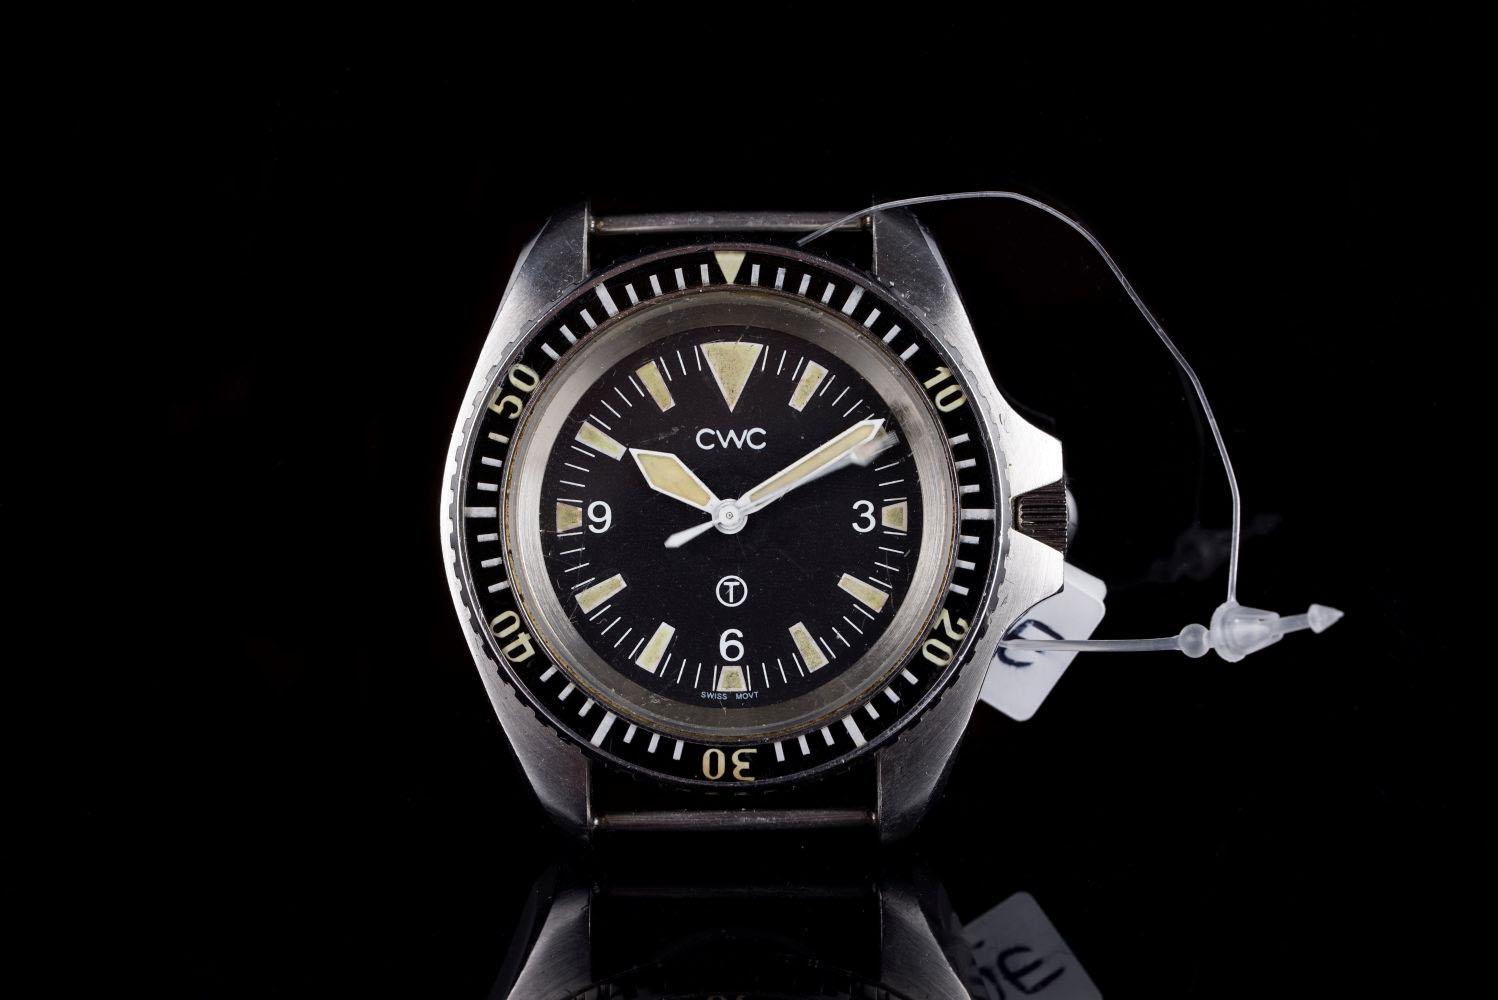 GENTLEMENS CWC MILITARY AUTOMATIC DIVERS WRISTWATCH, this piece is to be sold as parts and